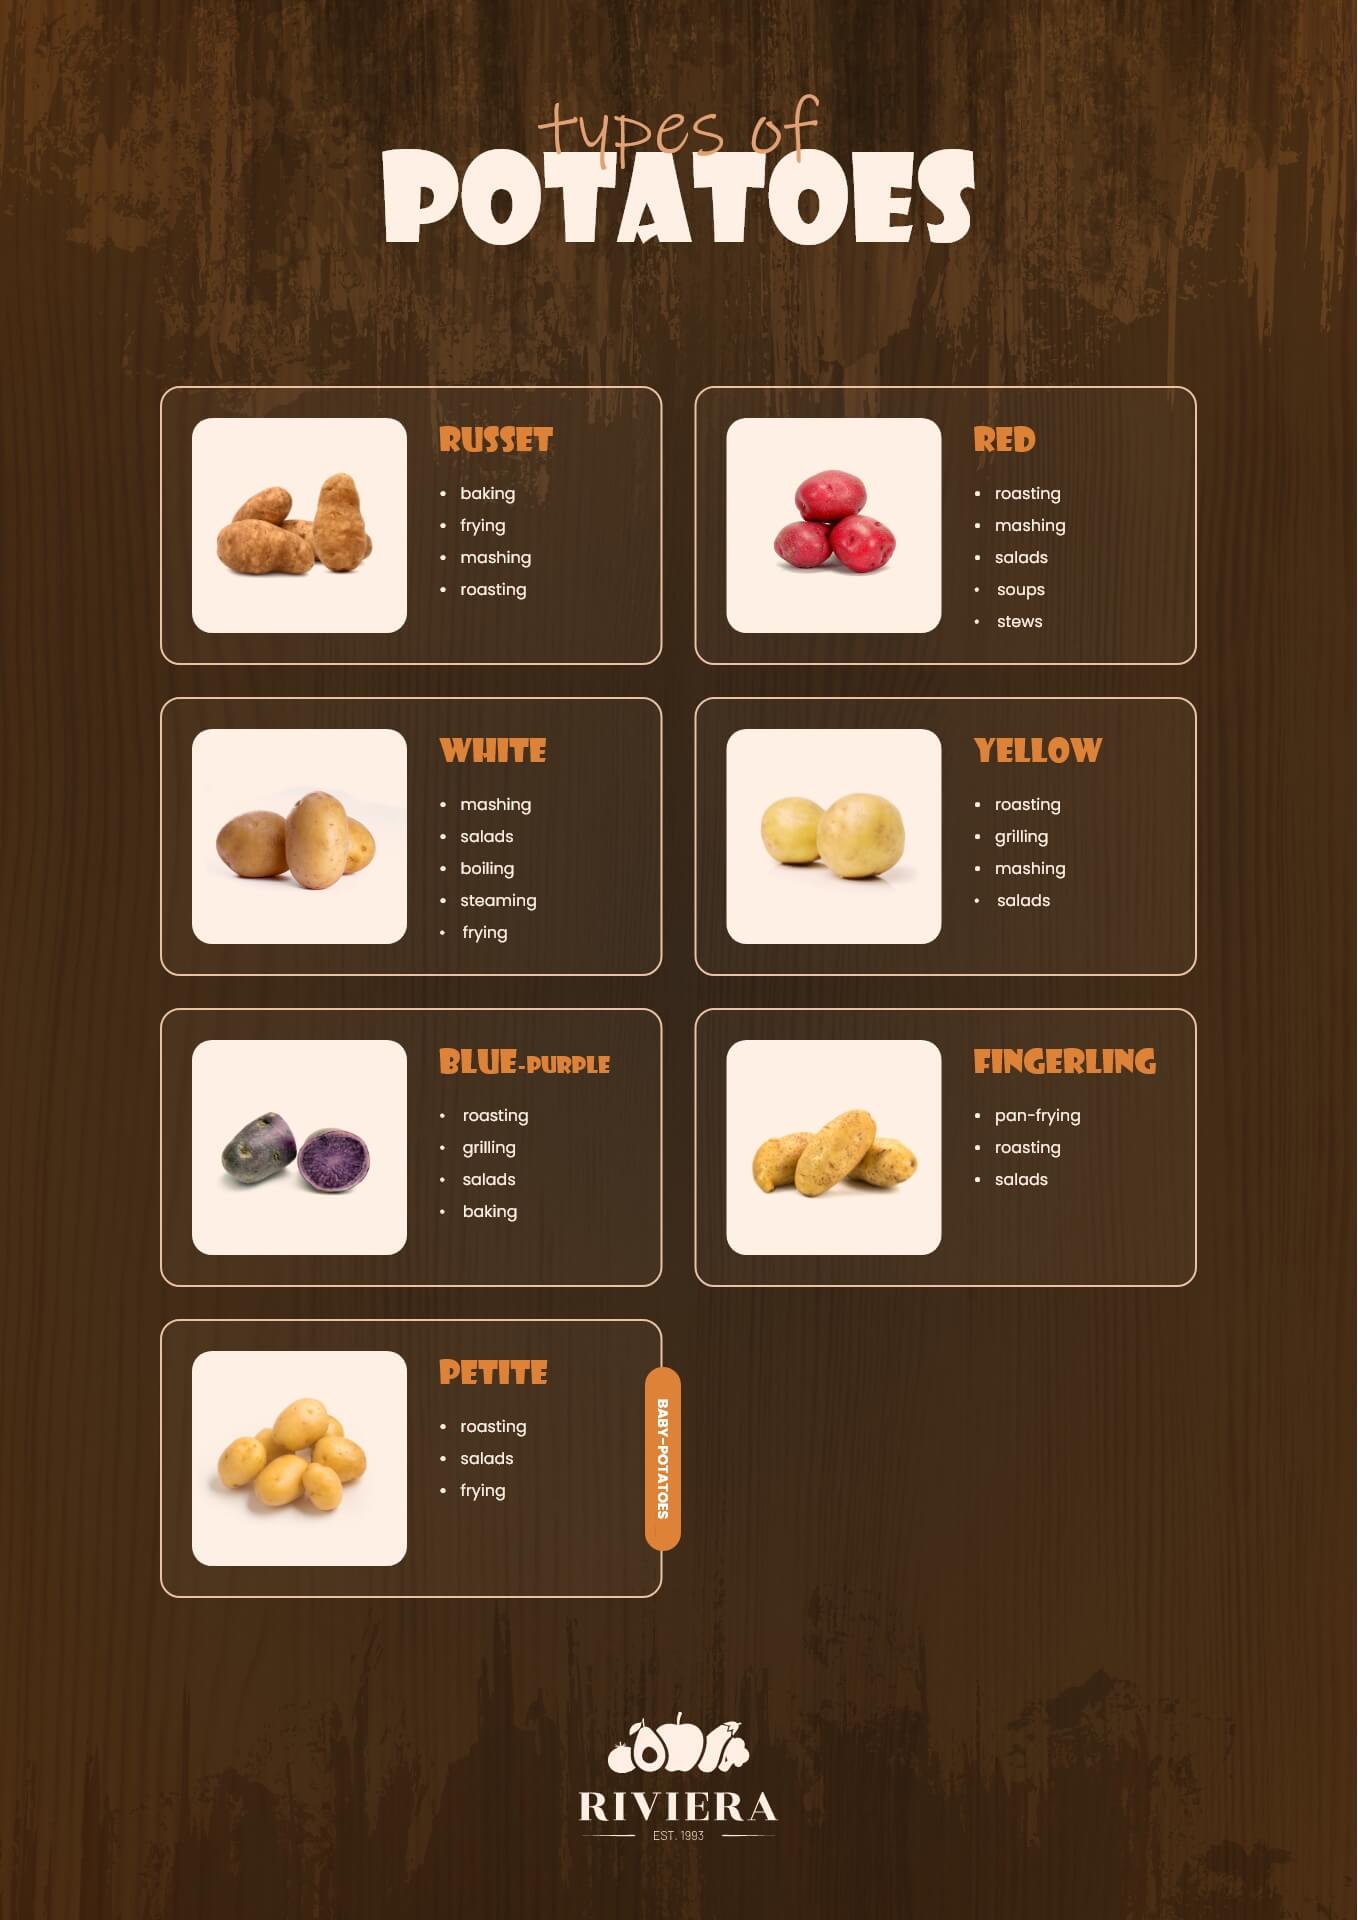 Potato Varieties and Cooking Guide | Riviera Produce